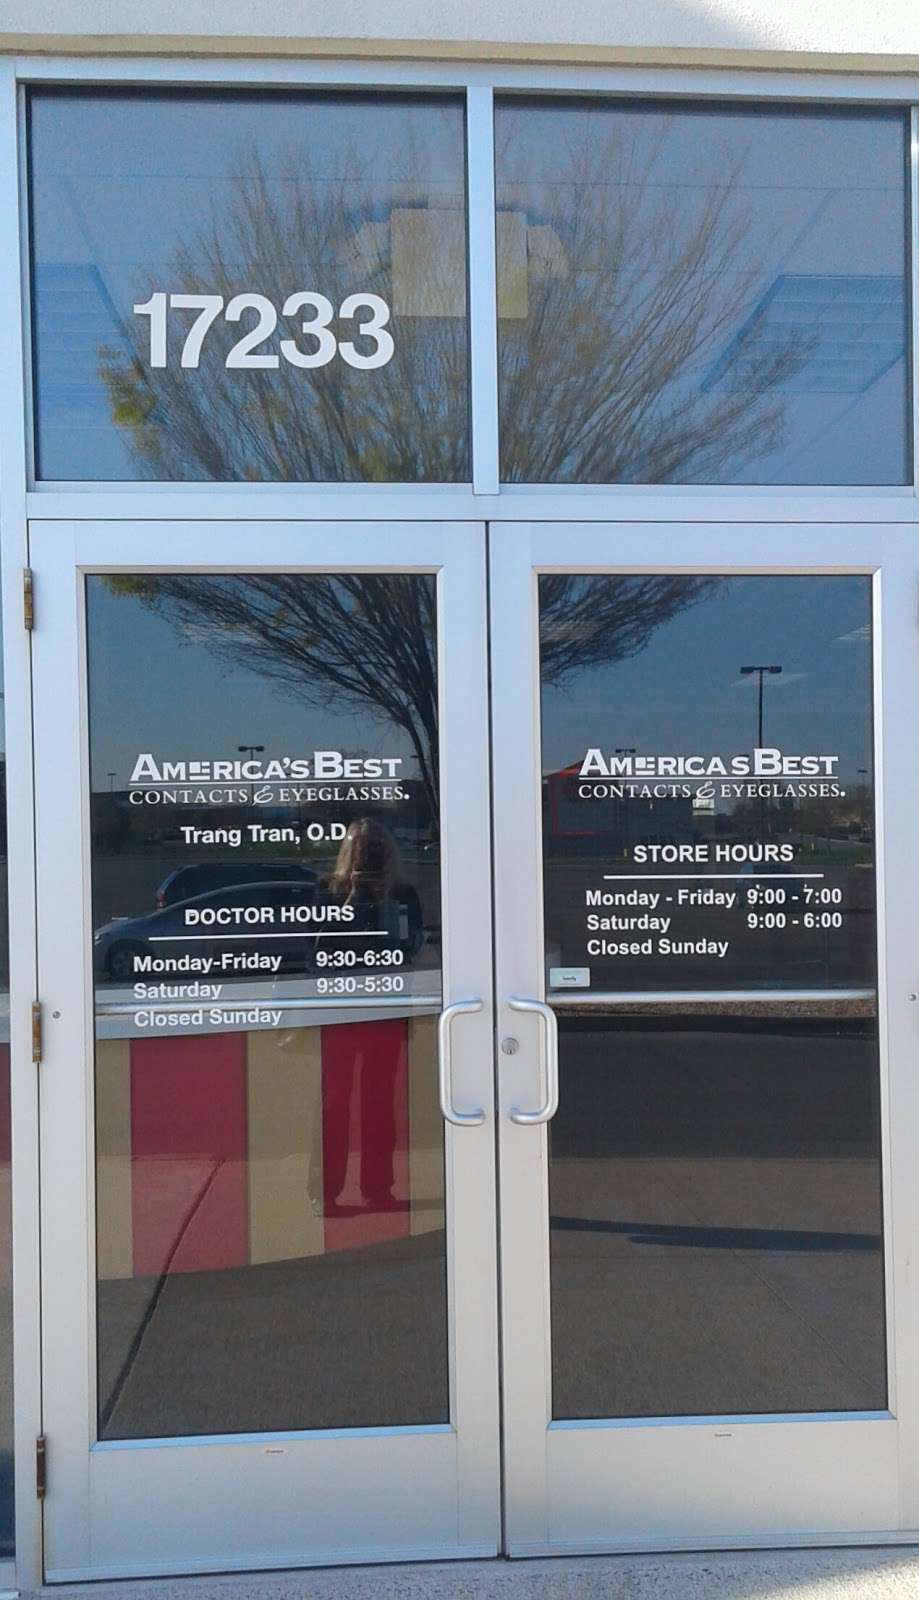 Americas Best Contacts & Eyeglasses | 17233 Cole Rd, Hagerstown, MD 21740 | Phone: (240) 329-4699